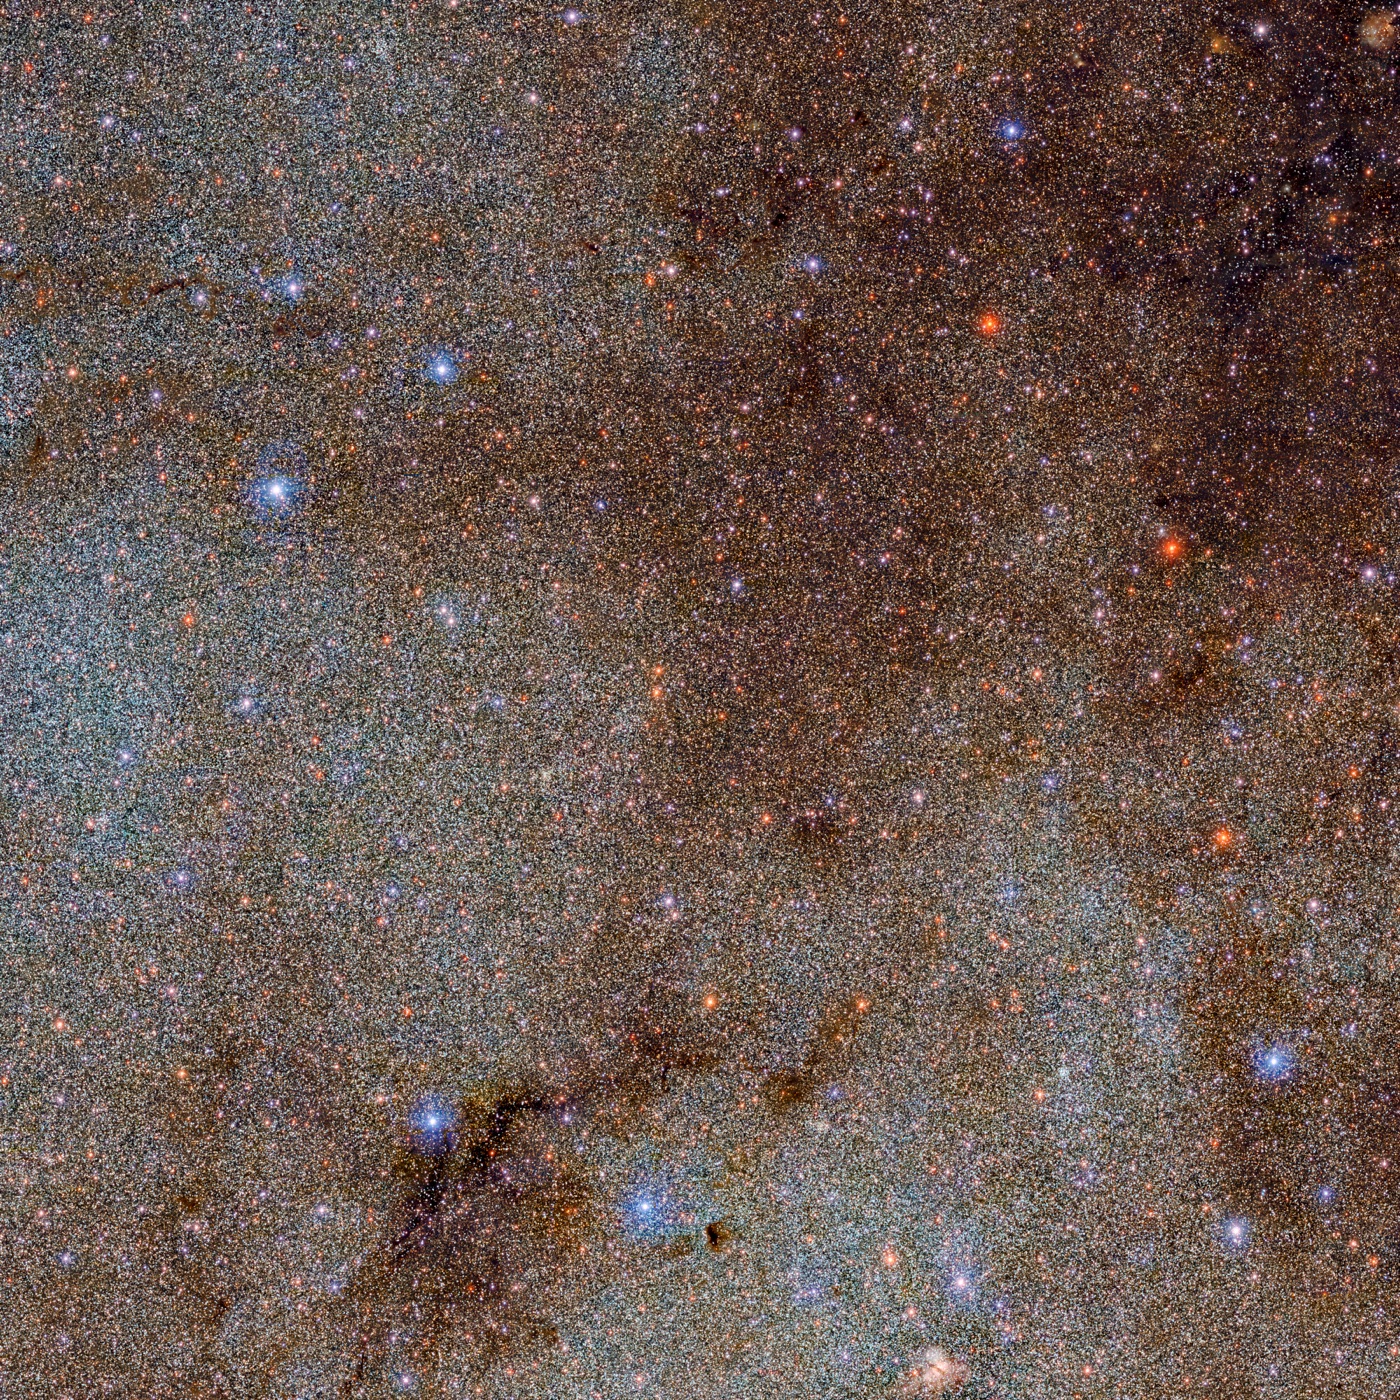 small portion of an image of part of the Milky Way with 3.32 billion individually identifiable objects